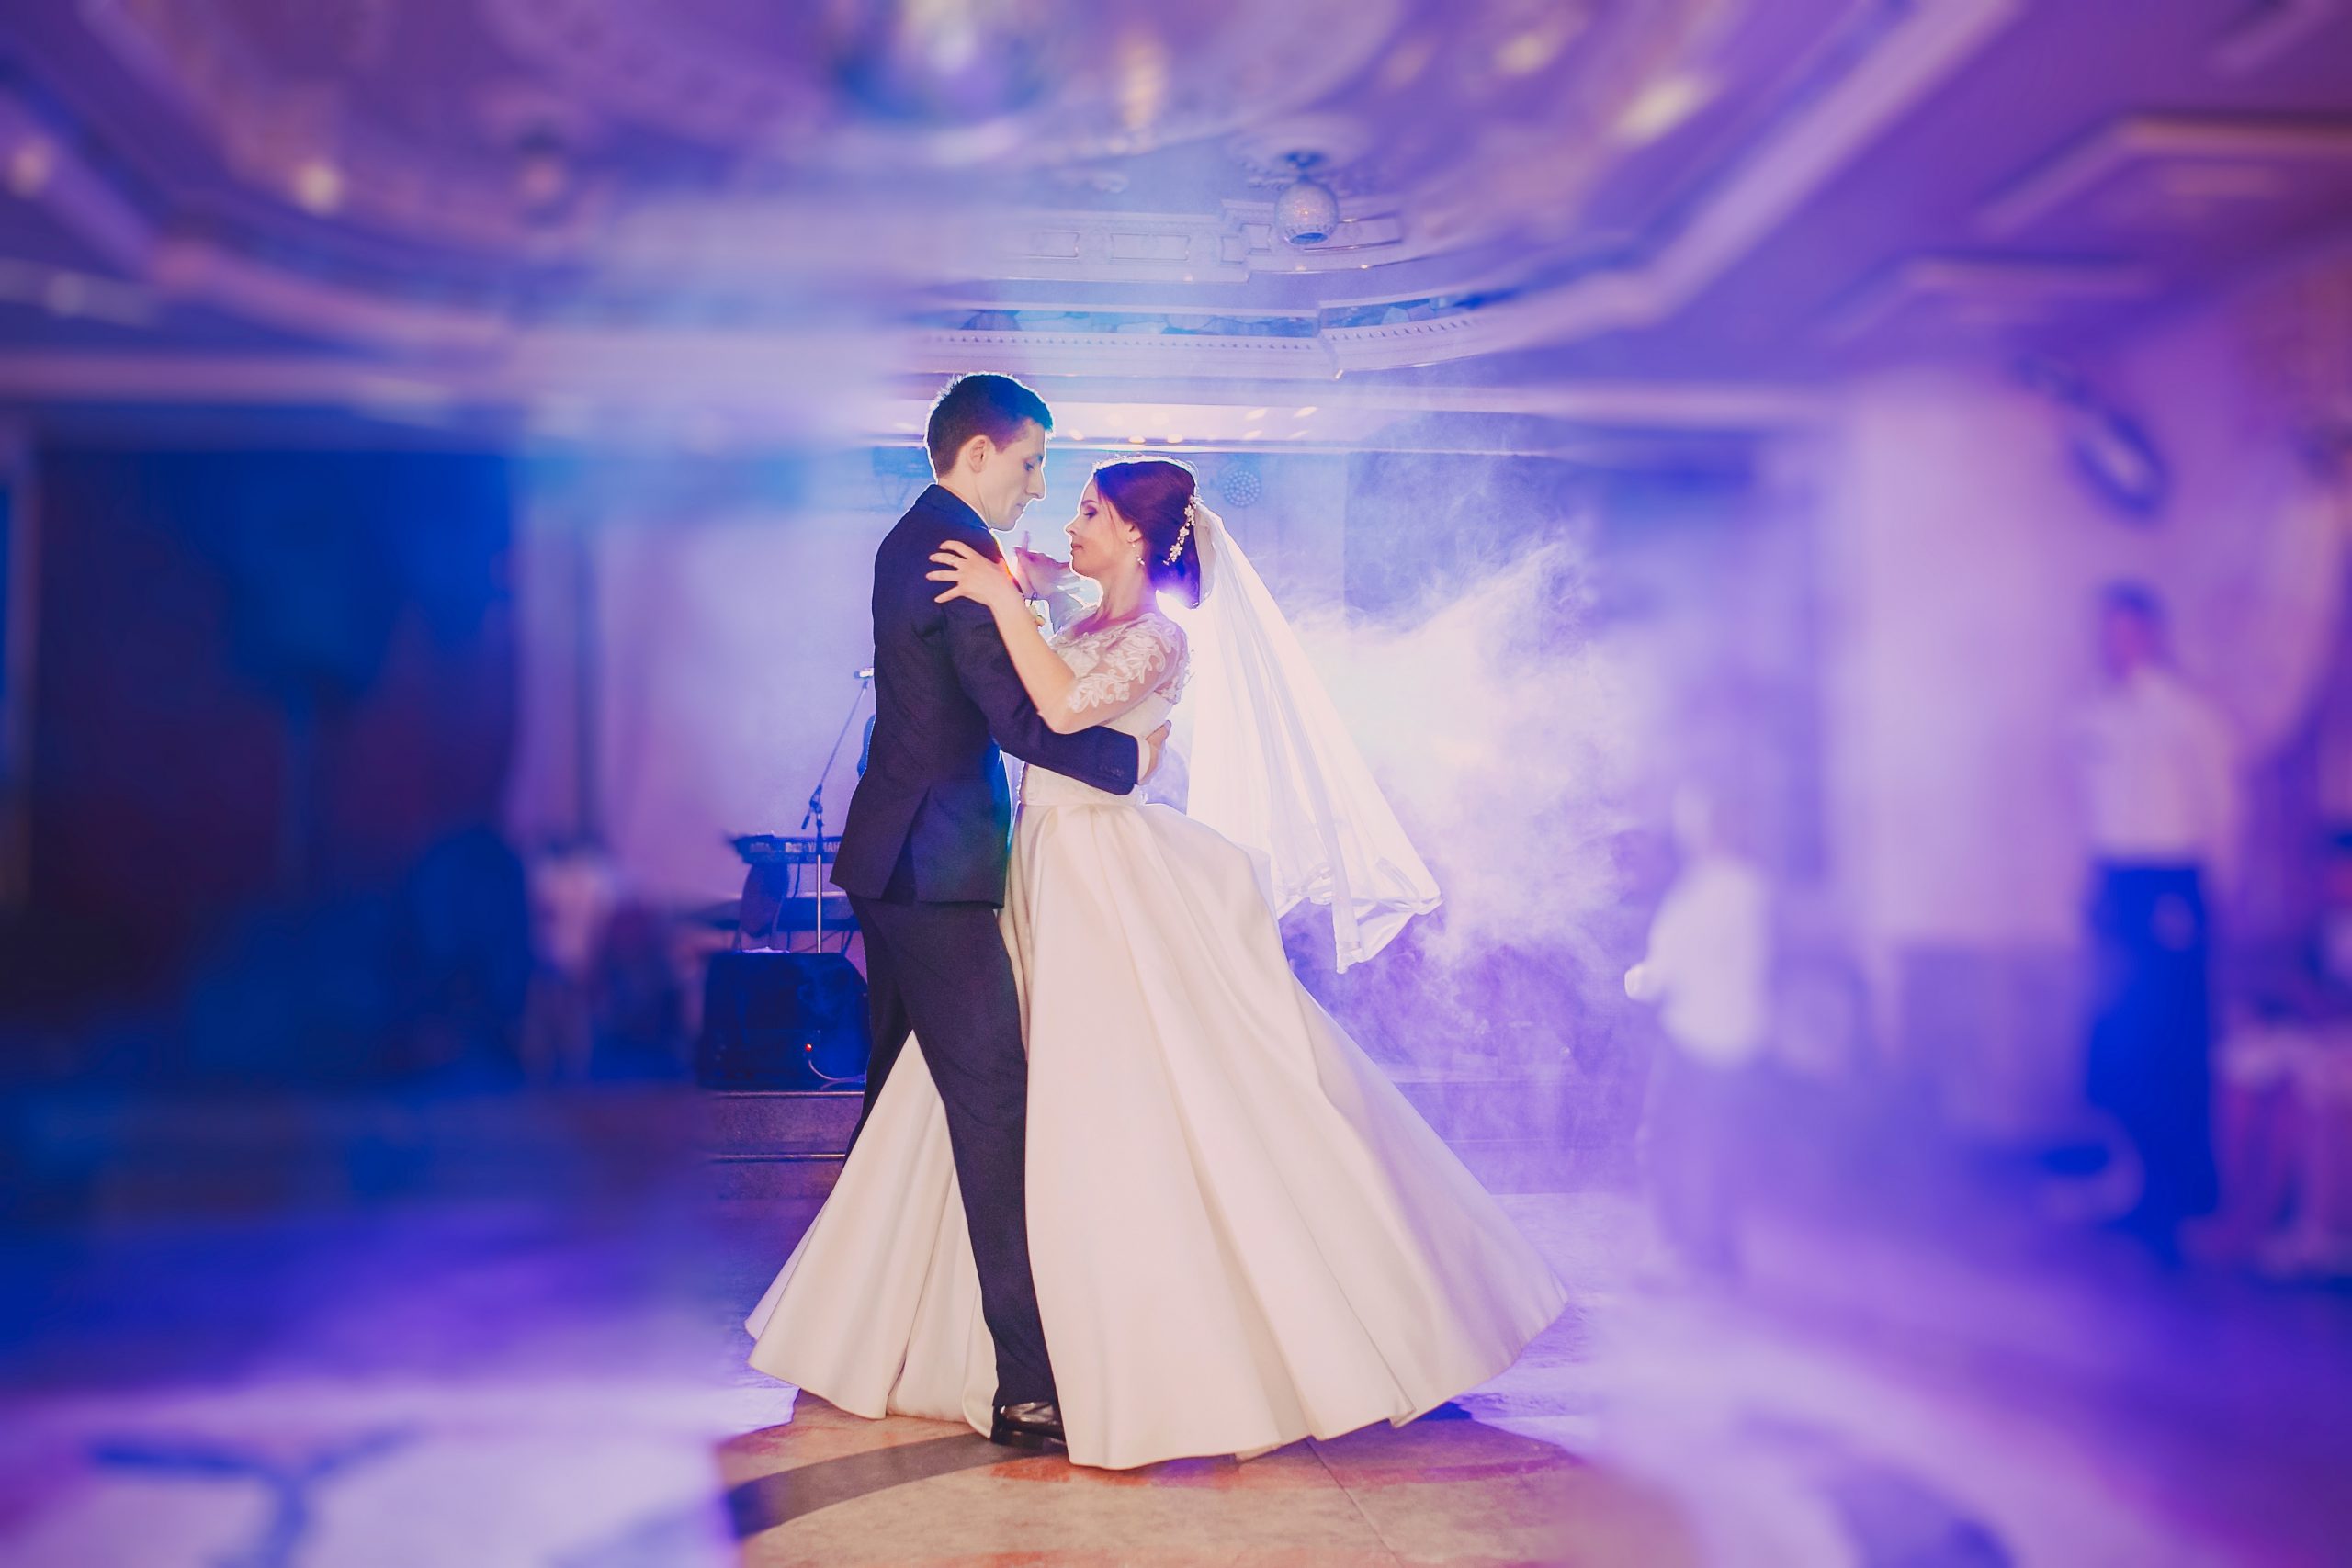 Finding Ideal St. Paul Wedding Venues